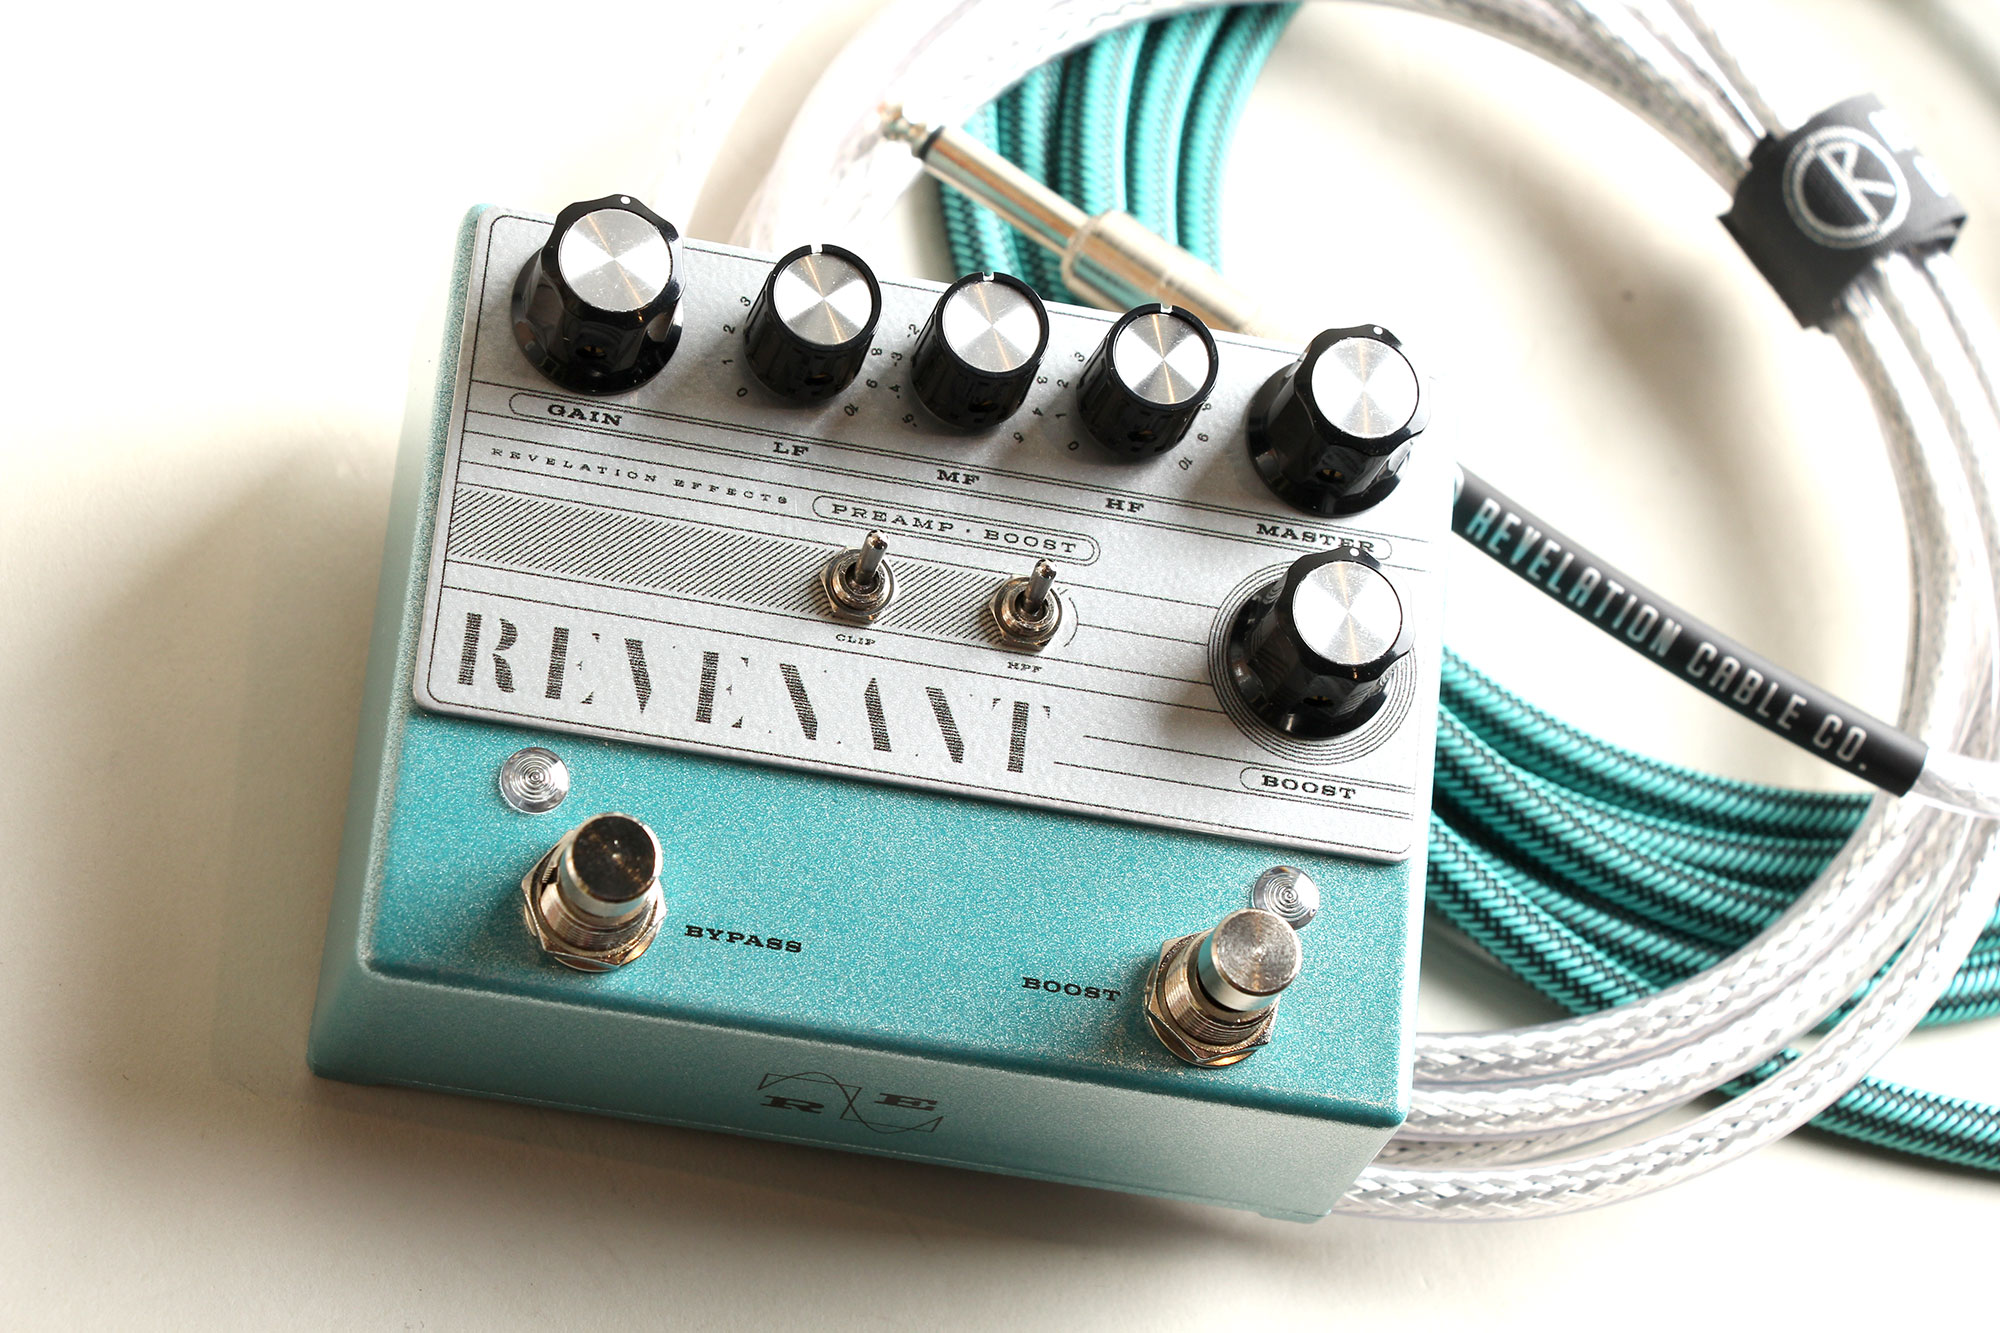 Revelation Effects REVENANT Preamp-Boost V1.2 -Teal Sparkle with Silver face plate- (Limited) レベレーションエフェクト SM2024EF サブ画像7